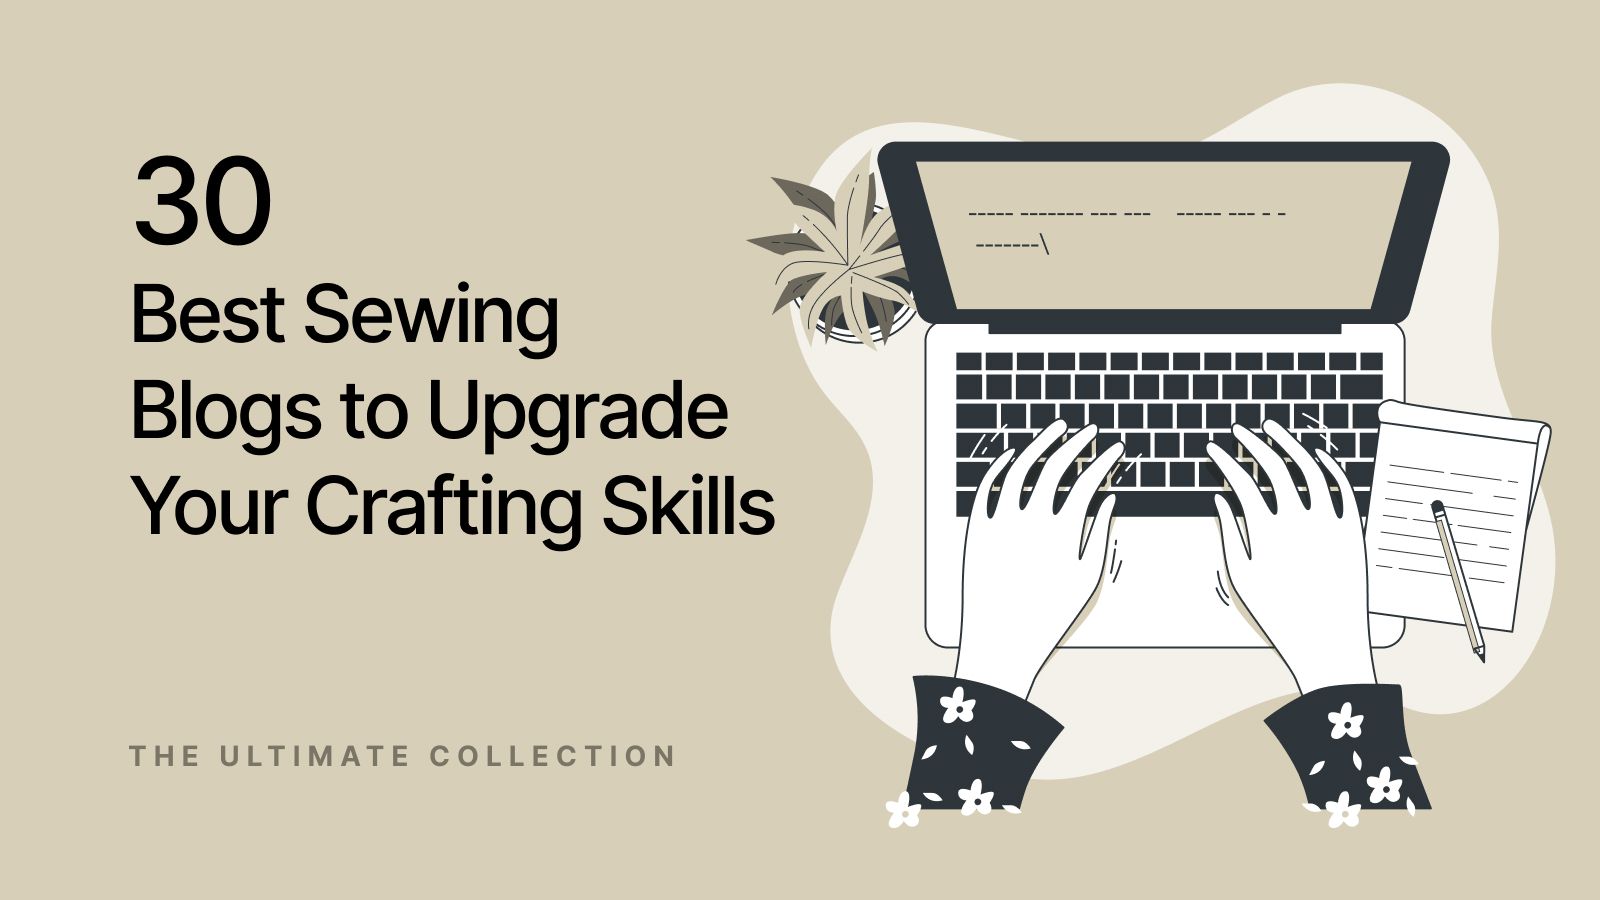 30 Best Sewing Blogs to Upgrade Your Crafting Skills